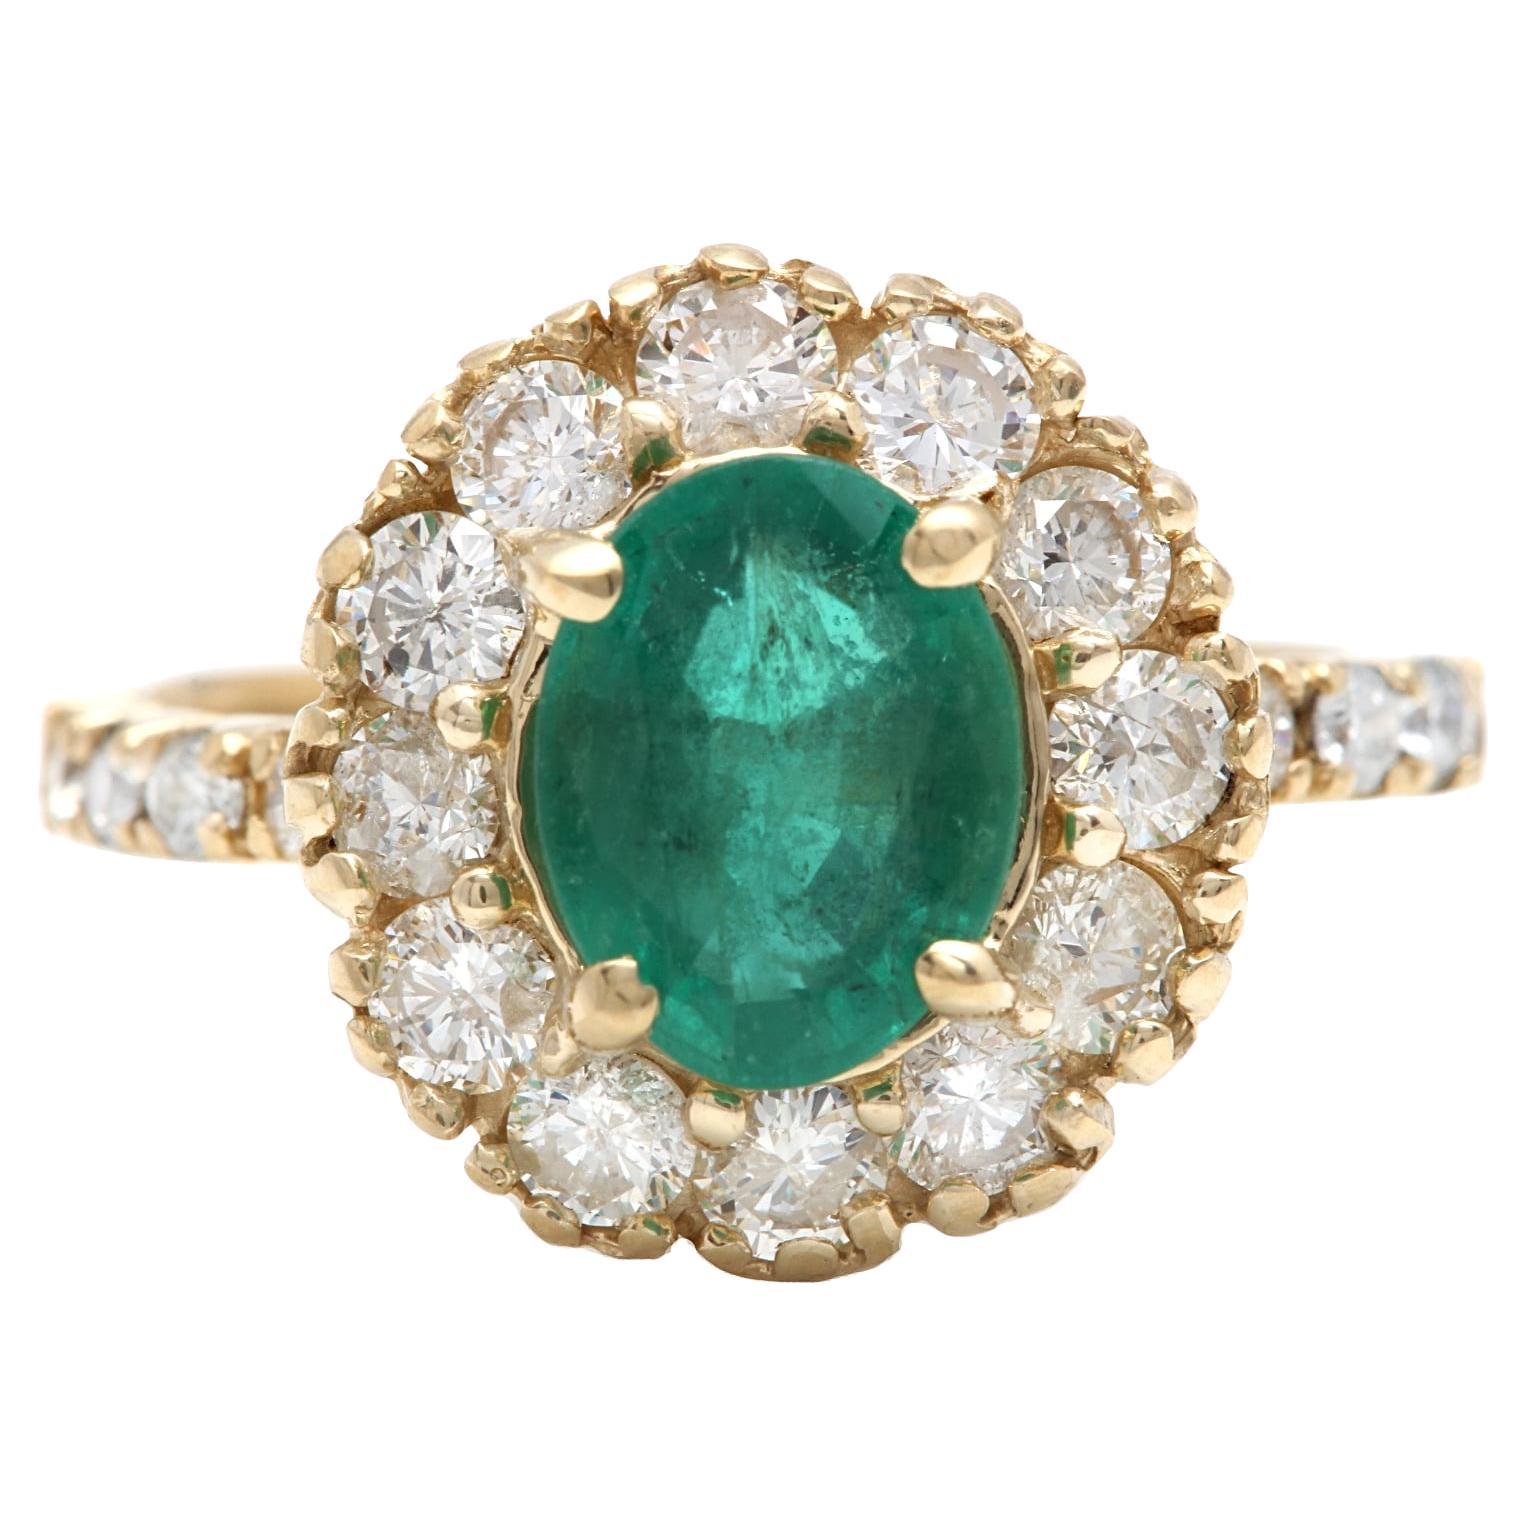 2.50Ct Natural Emerald and Diamond 14K Solid Yellow Gold Ring